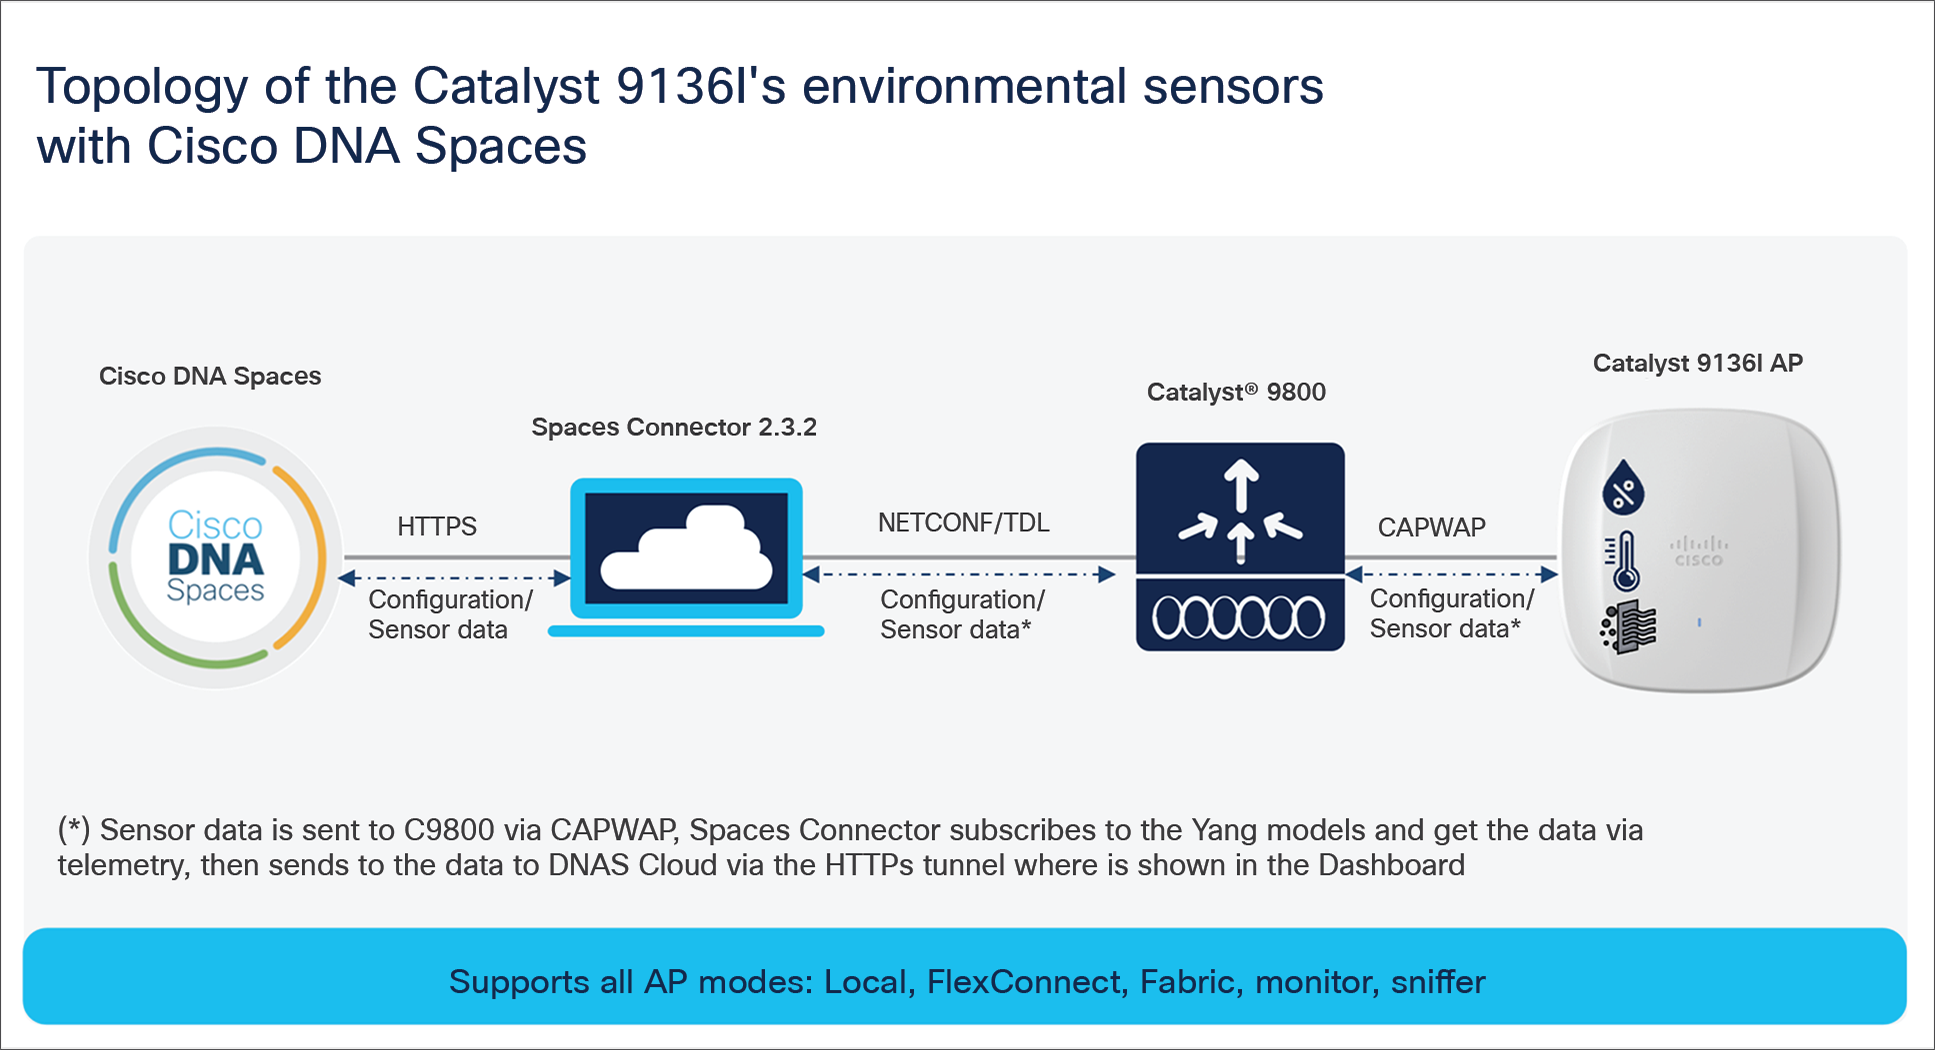 Topology of the Catalyst 9136I’s environmental sensors with Cisco DNA Spaces